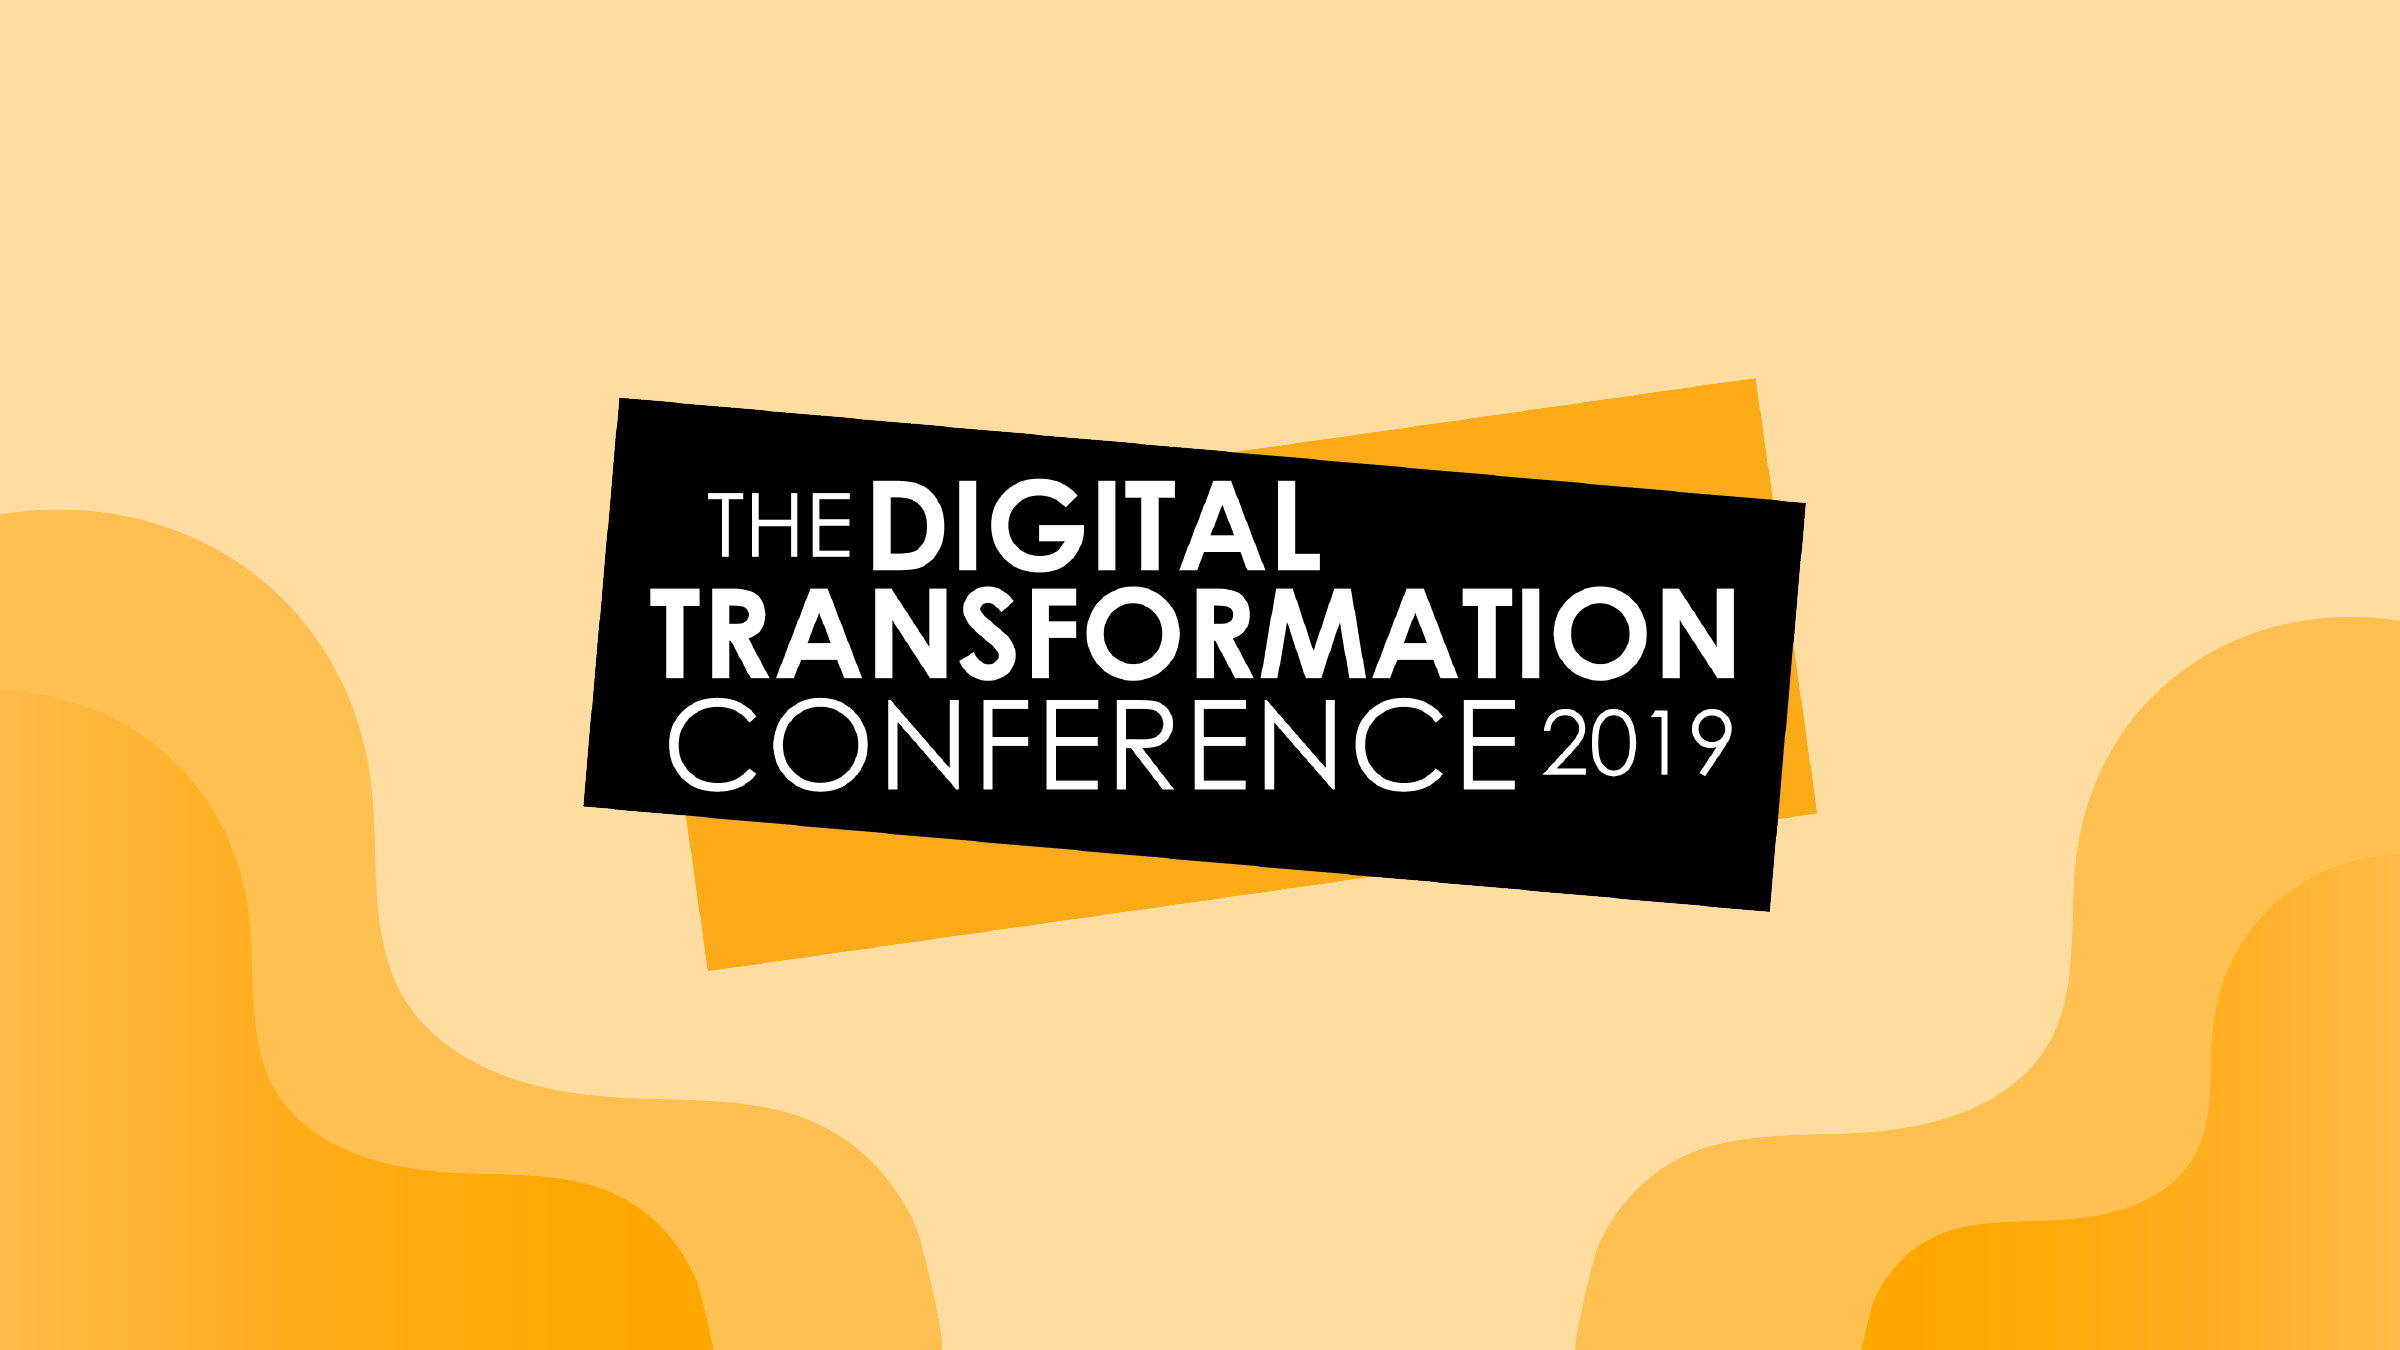 Join us at the Digital Transformation Conference in London Human Made